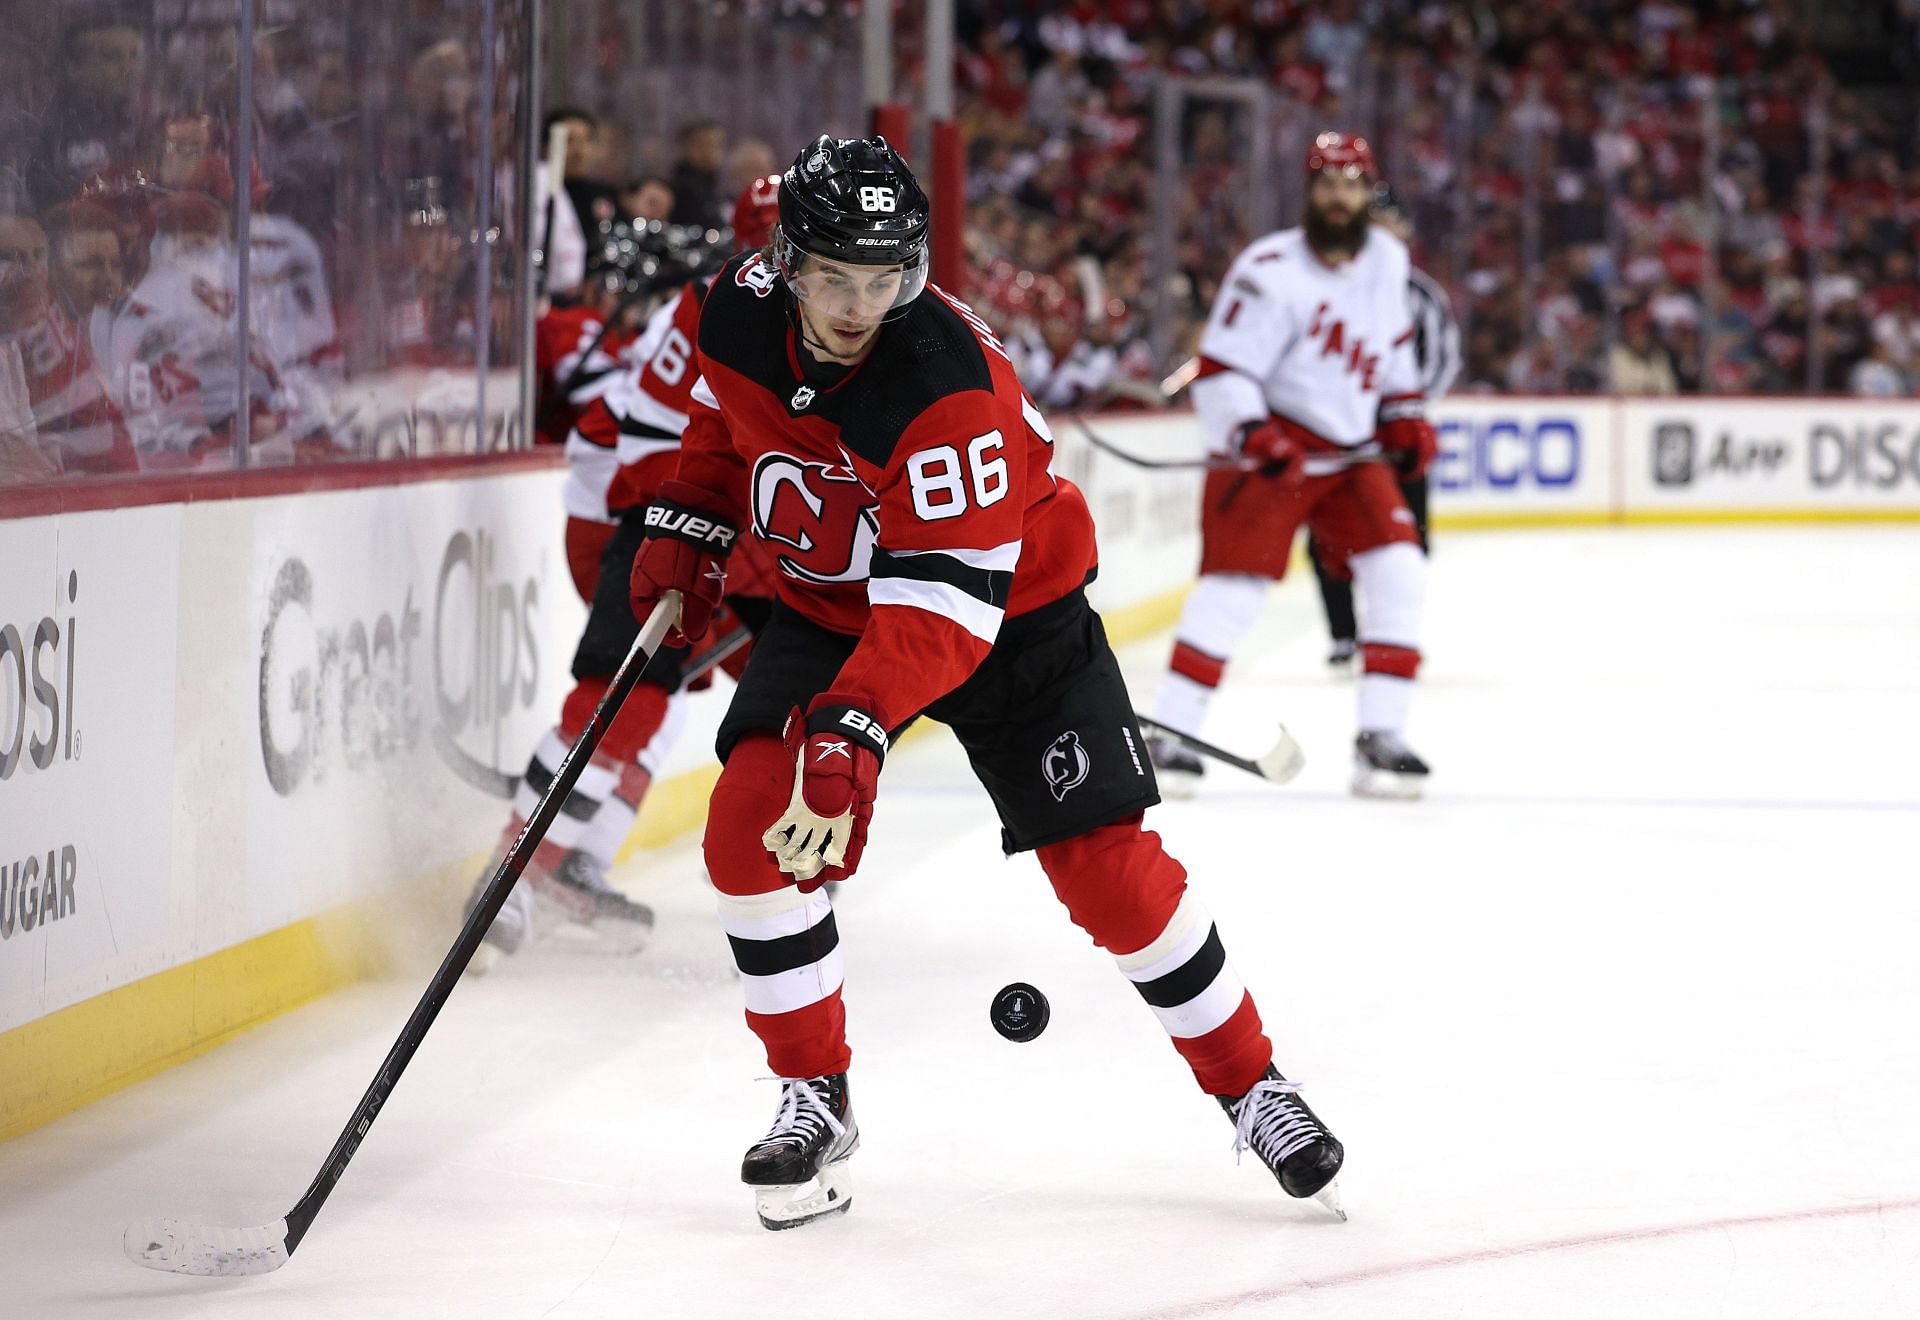 NJ Devils All-Star Jack Hughes out with upper-body injury